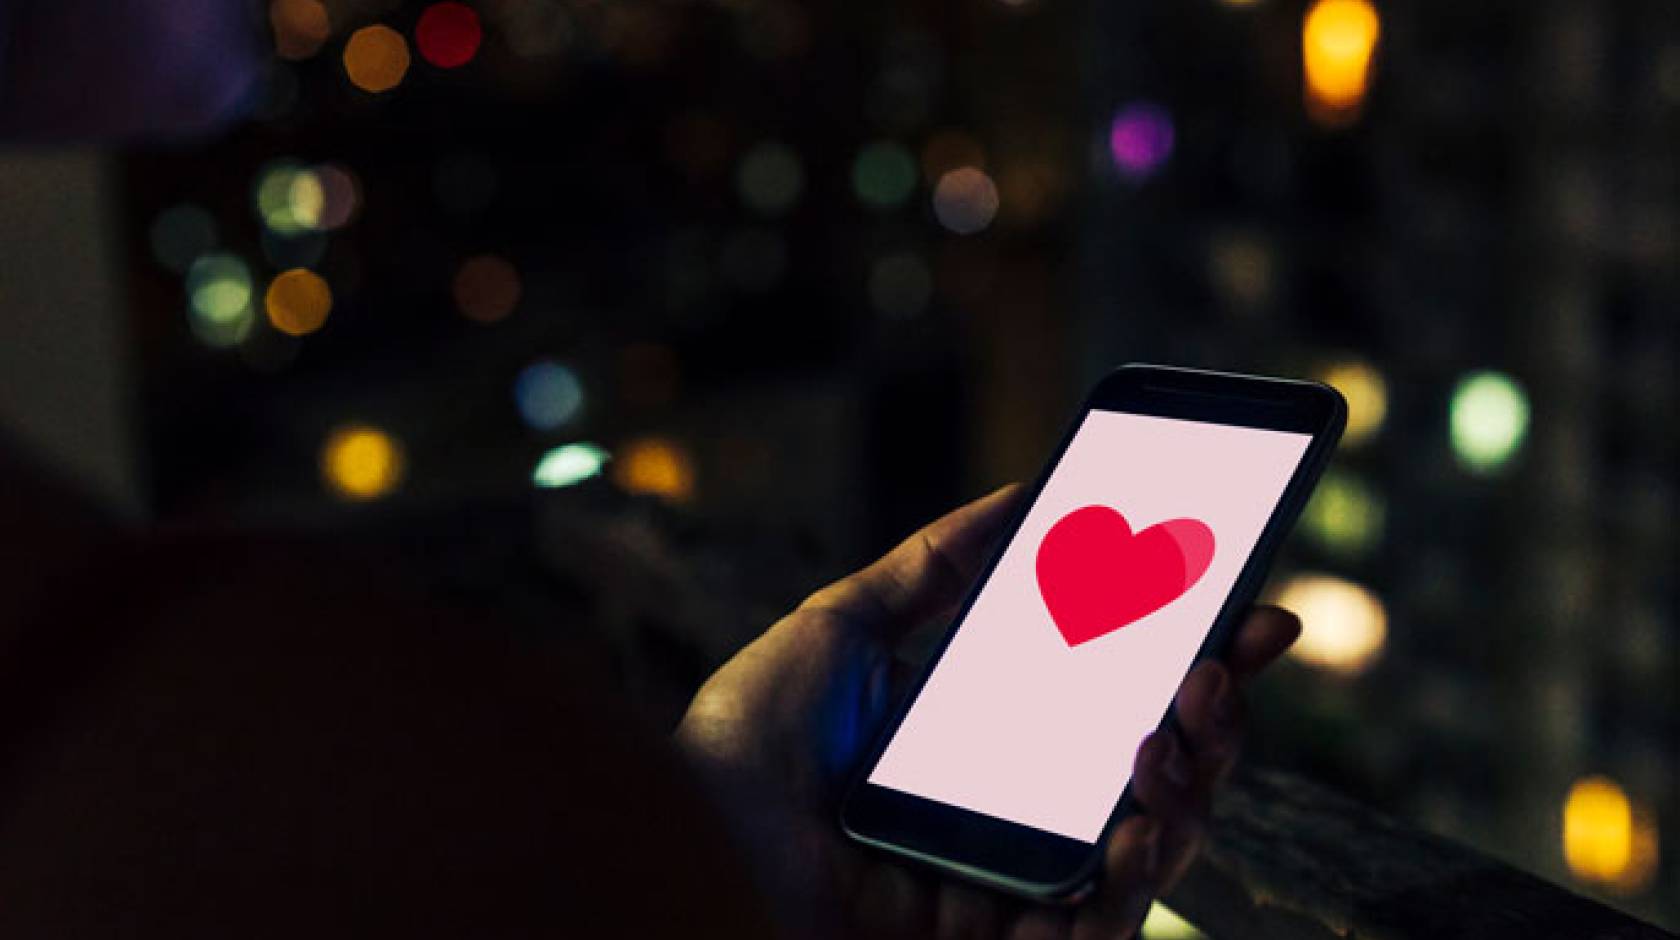 A phone with a heart on it at night